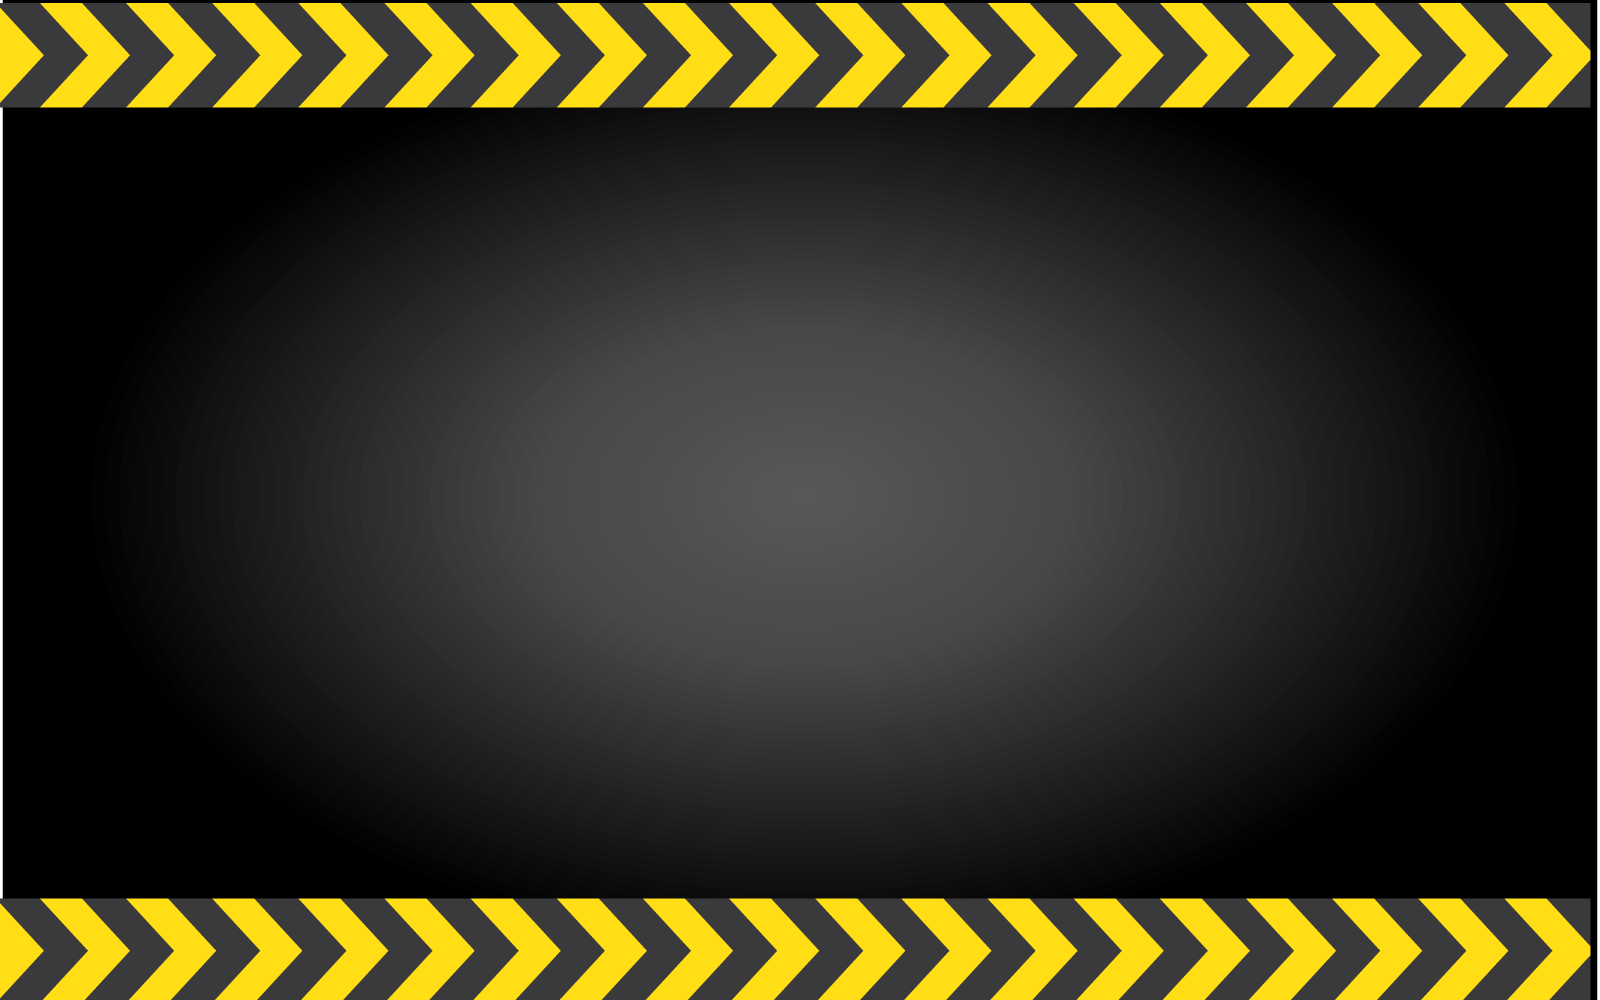 Construction metal background with black and yellow safety line design vector